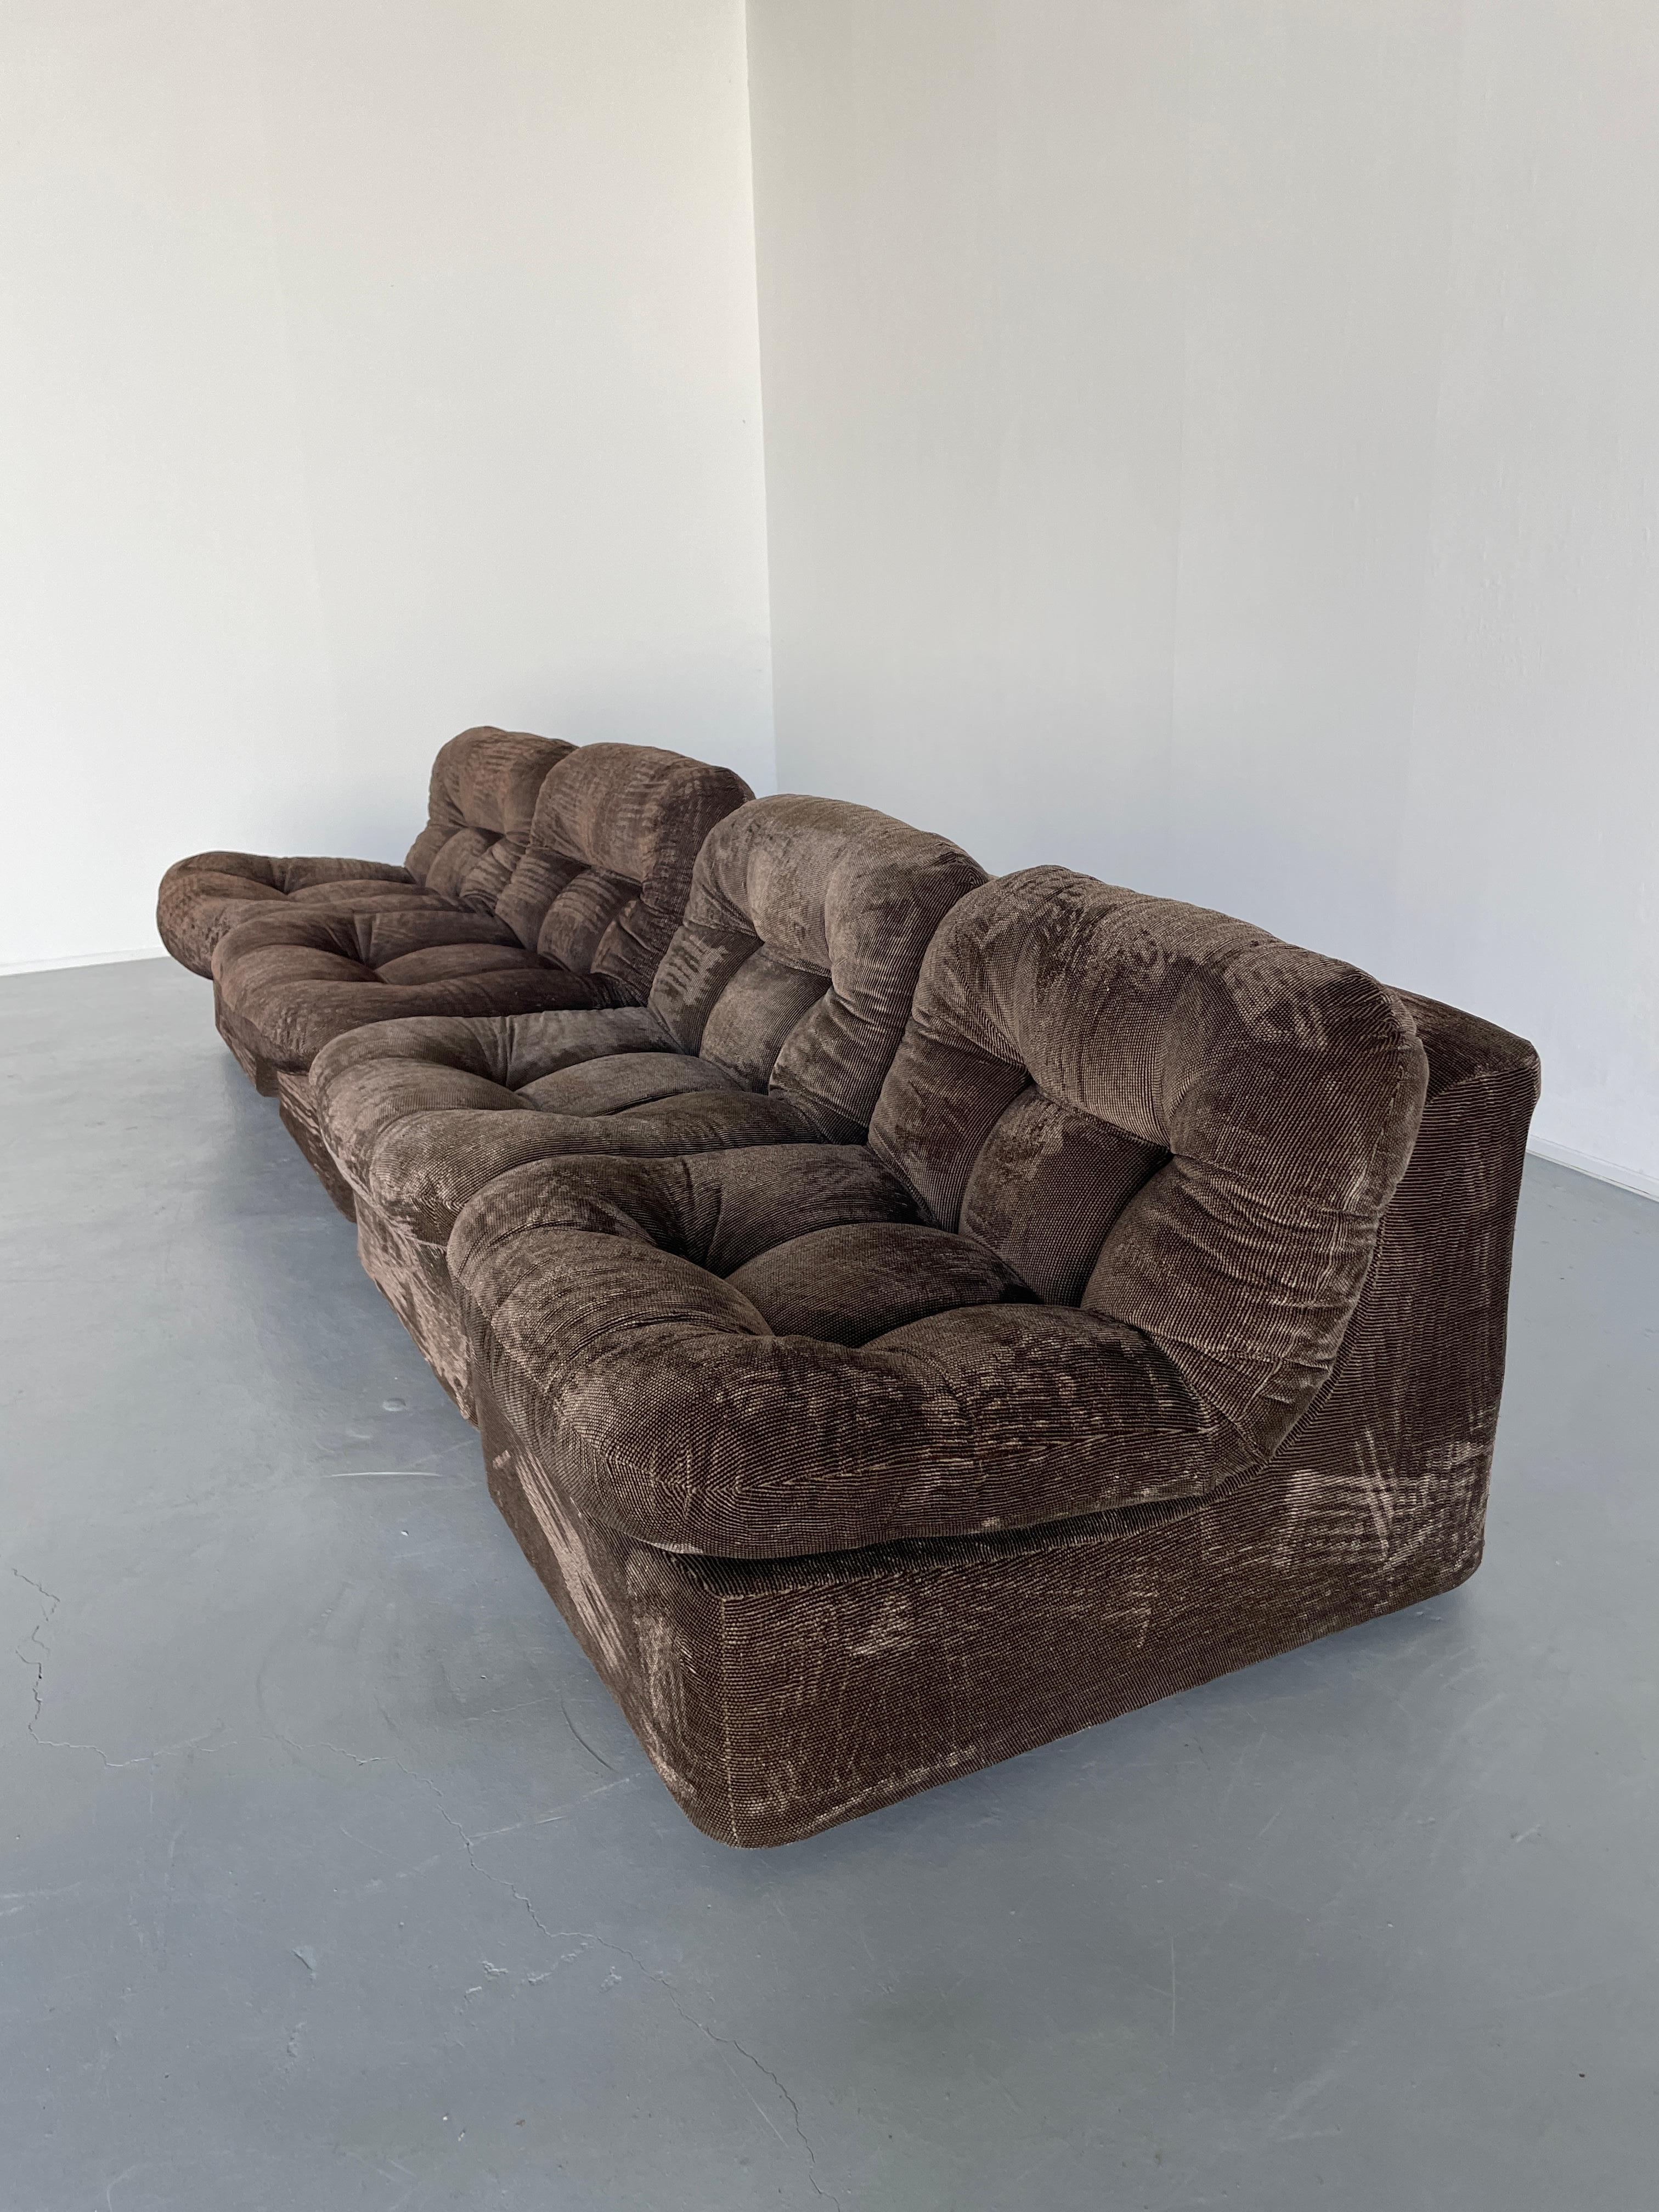 Late 20th Century Vintage Italian Space Age Modular Sofa in Striped Brown Velvet, Set of 4, 1970s